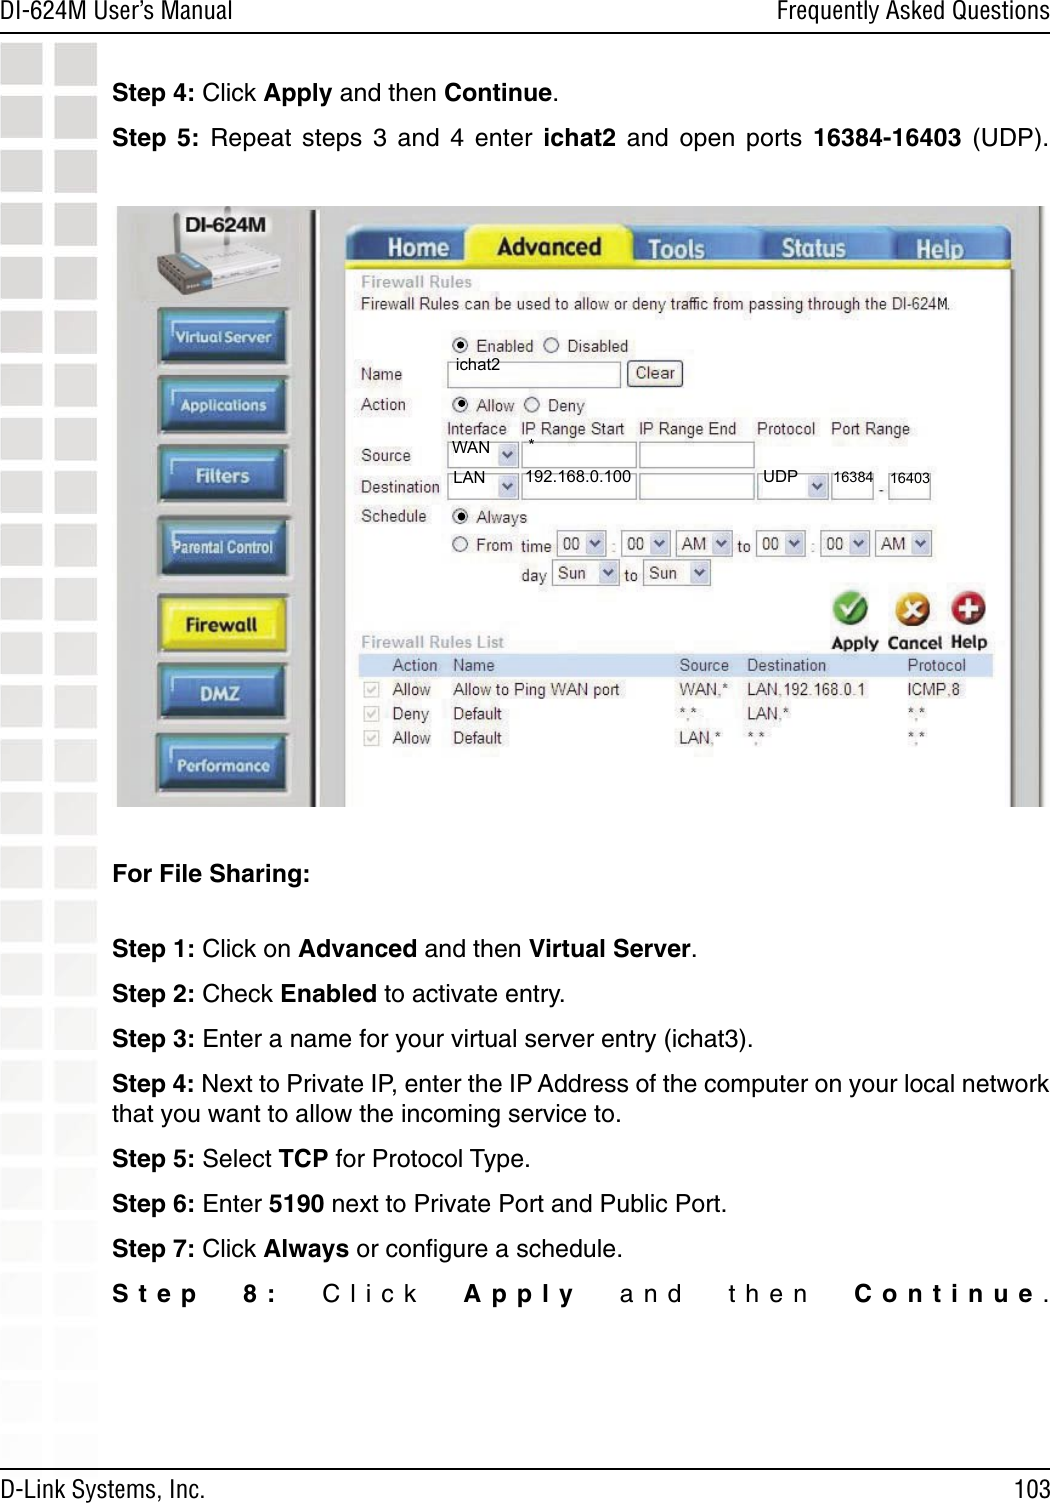 103DI-624M User’s Manual D-Link Systems, Inc.Frequently Asked QuestionsStep 4: Click Apply and then Continue. Step  5:  Repeat  steps  3  and  4  enter  ichat2  and  open  ports  16384-16403  (UDP).  For File Sharing:  Step 1: Click on Advanced and then Virtual Server.Step 2: Check Enabled to activate entry. Step 3: Enter a name for your virtual server entry (ichat3).Step 4: Next to Private IP, enter the IP Address of the computer on your local network that you want to allow the incoming service to. Step 5: Select TCP for Protocol Type. Step 6: Enter 5190 next to Private Port and Public Port. Step 7: Click Always or conﬁgure a schedule. Step  8:  Click  Apply  and  then  Continue.  192.168.0.100ichat2*16384UDPWANLAN 16403